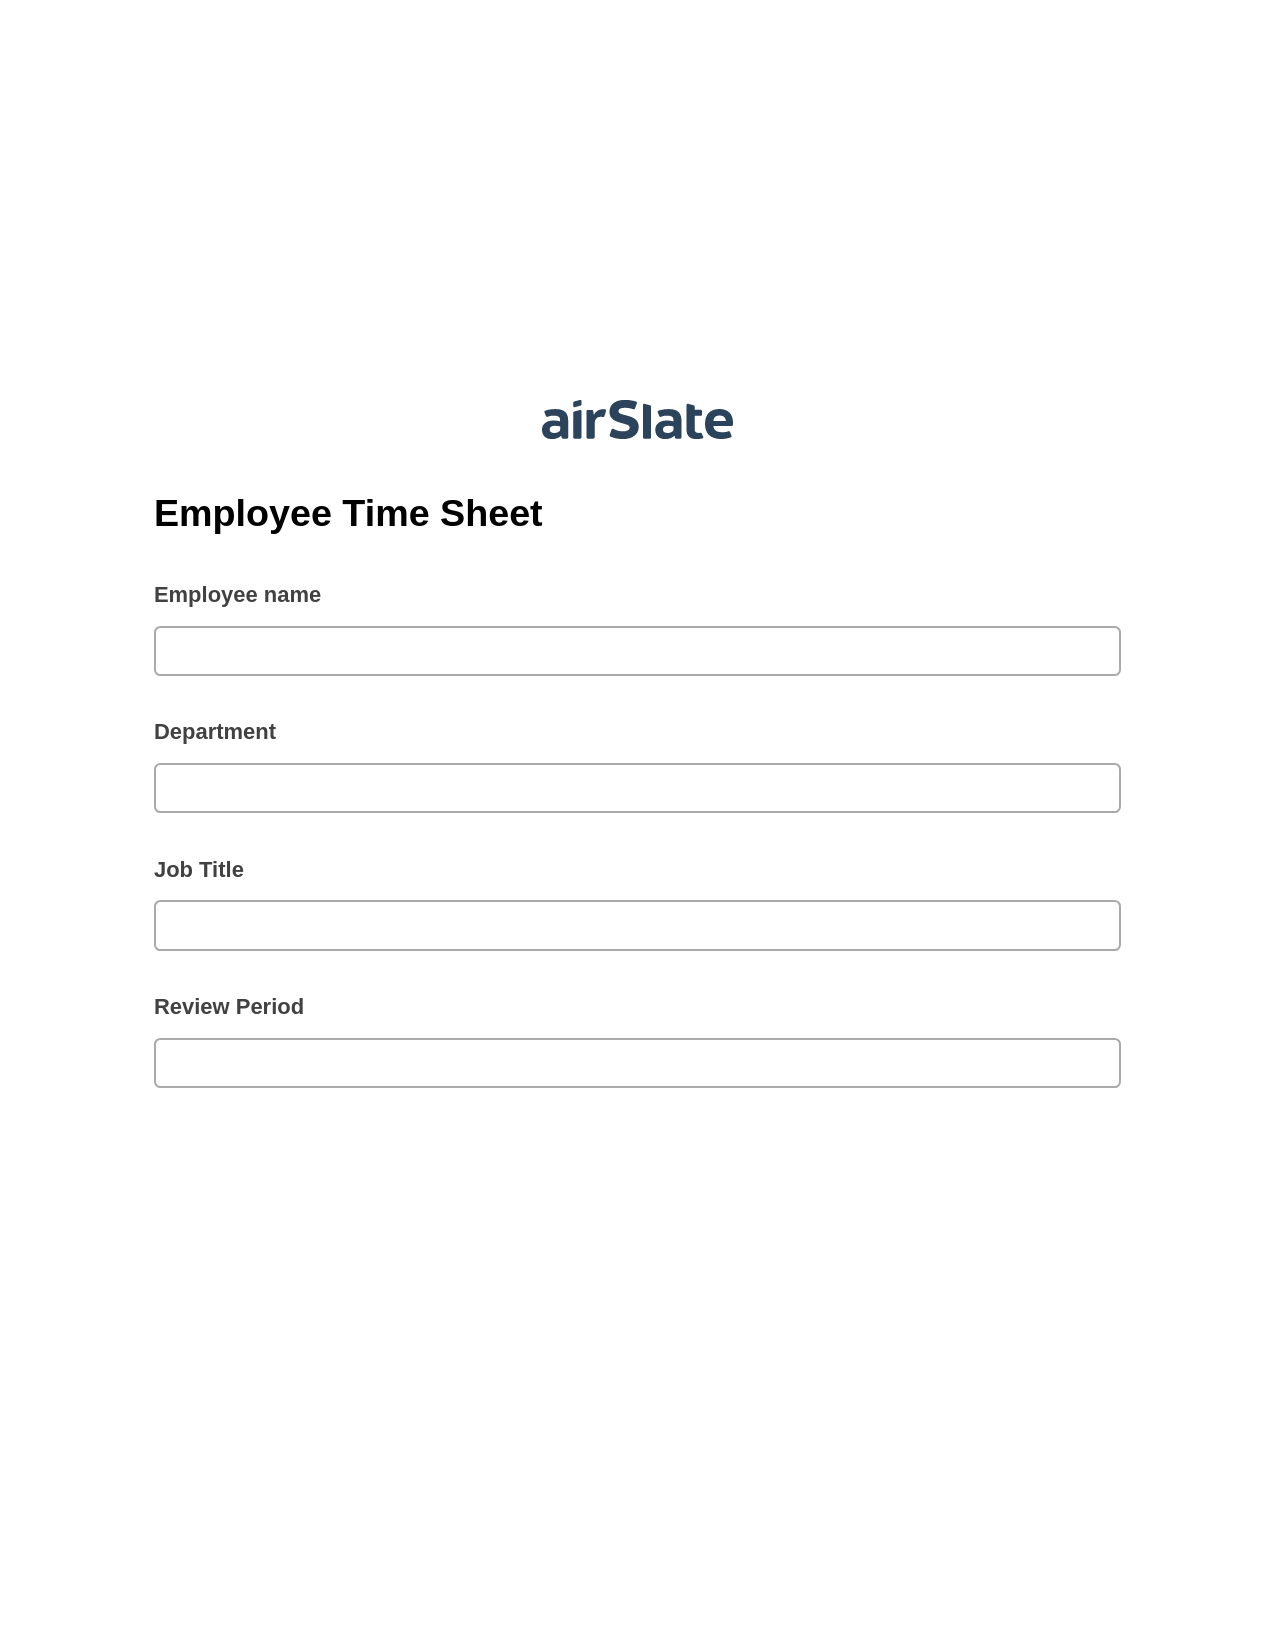 Multirole Employee Time Sheet Pre-fill from another Slate Bot, Create Salesforce Records Bot, Export to MySQL Bot